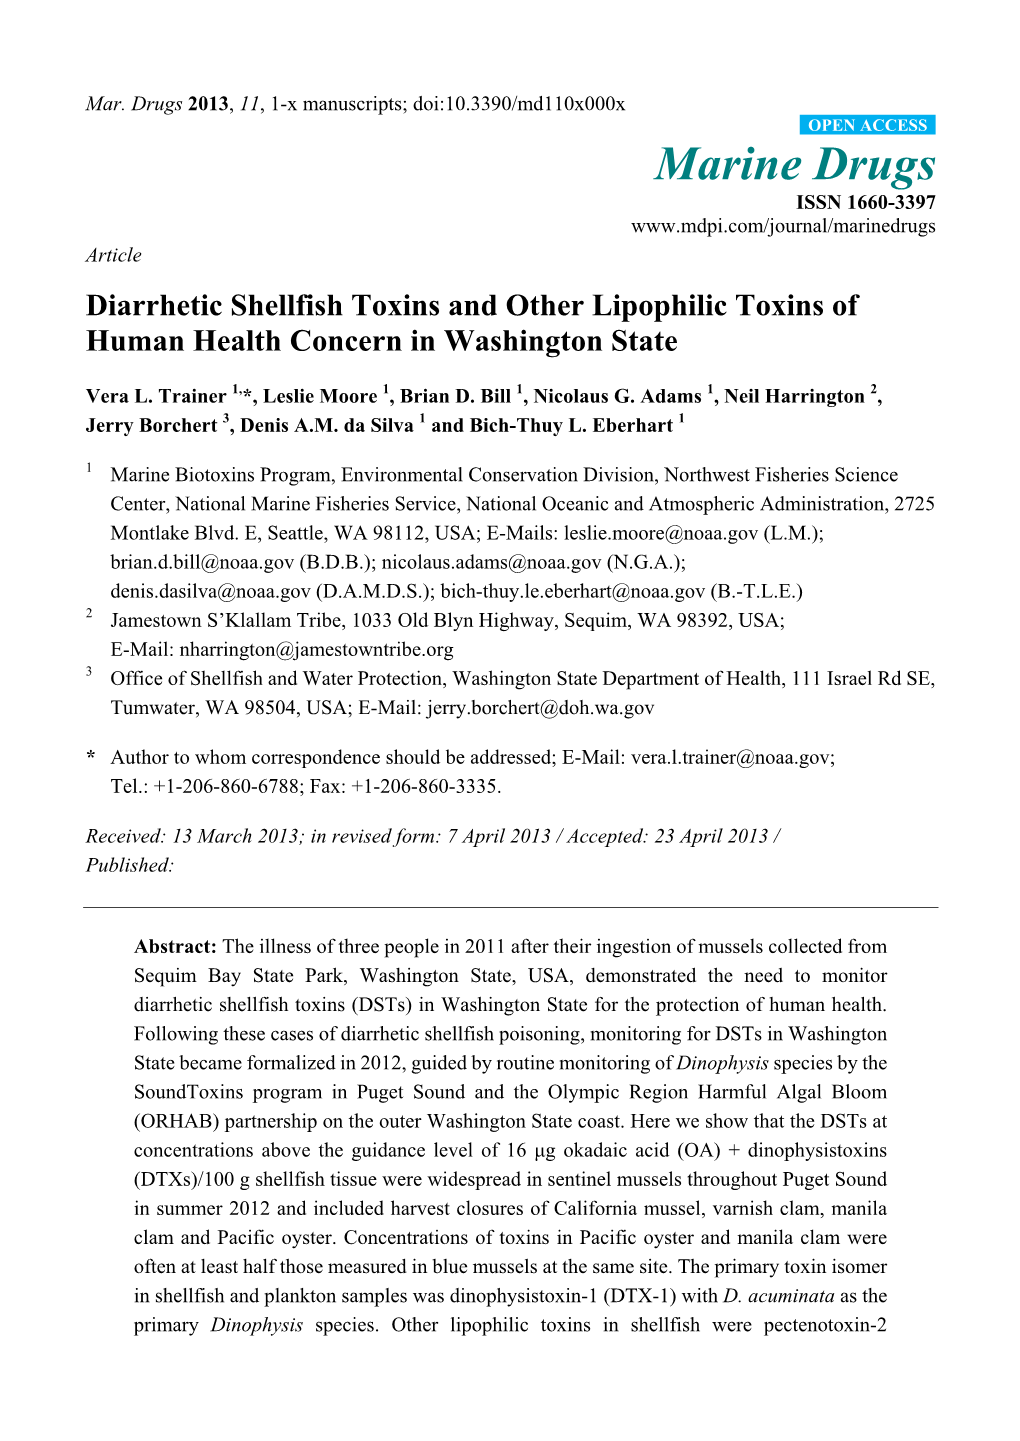 Diarrhetic Shellfish Toxins and Other Lipophilic Toxins of Human Health Concern in Washington State